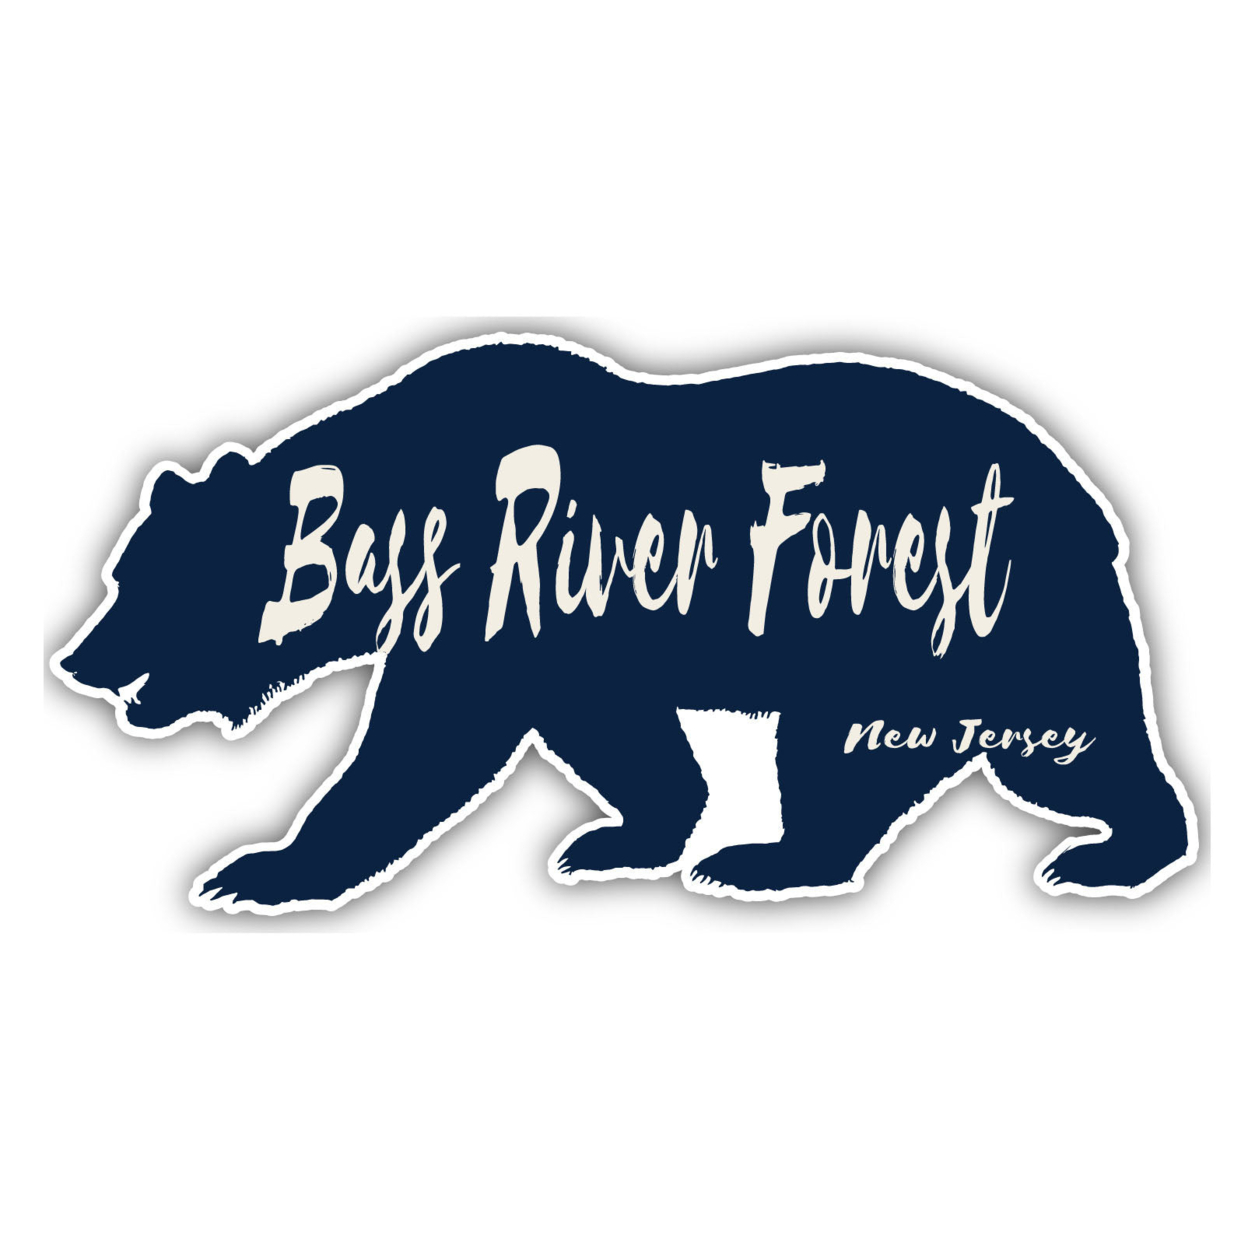 Bass River Forest New Jersey Souvenir Decorative Stickers (Choose Theme And Size) - 4-Pack, 12-Inch, Bear